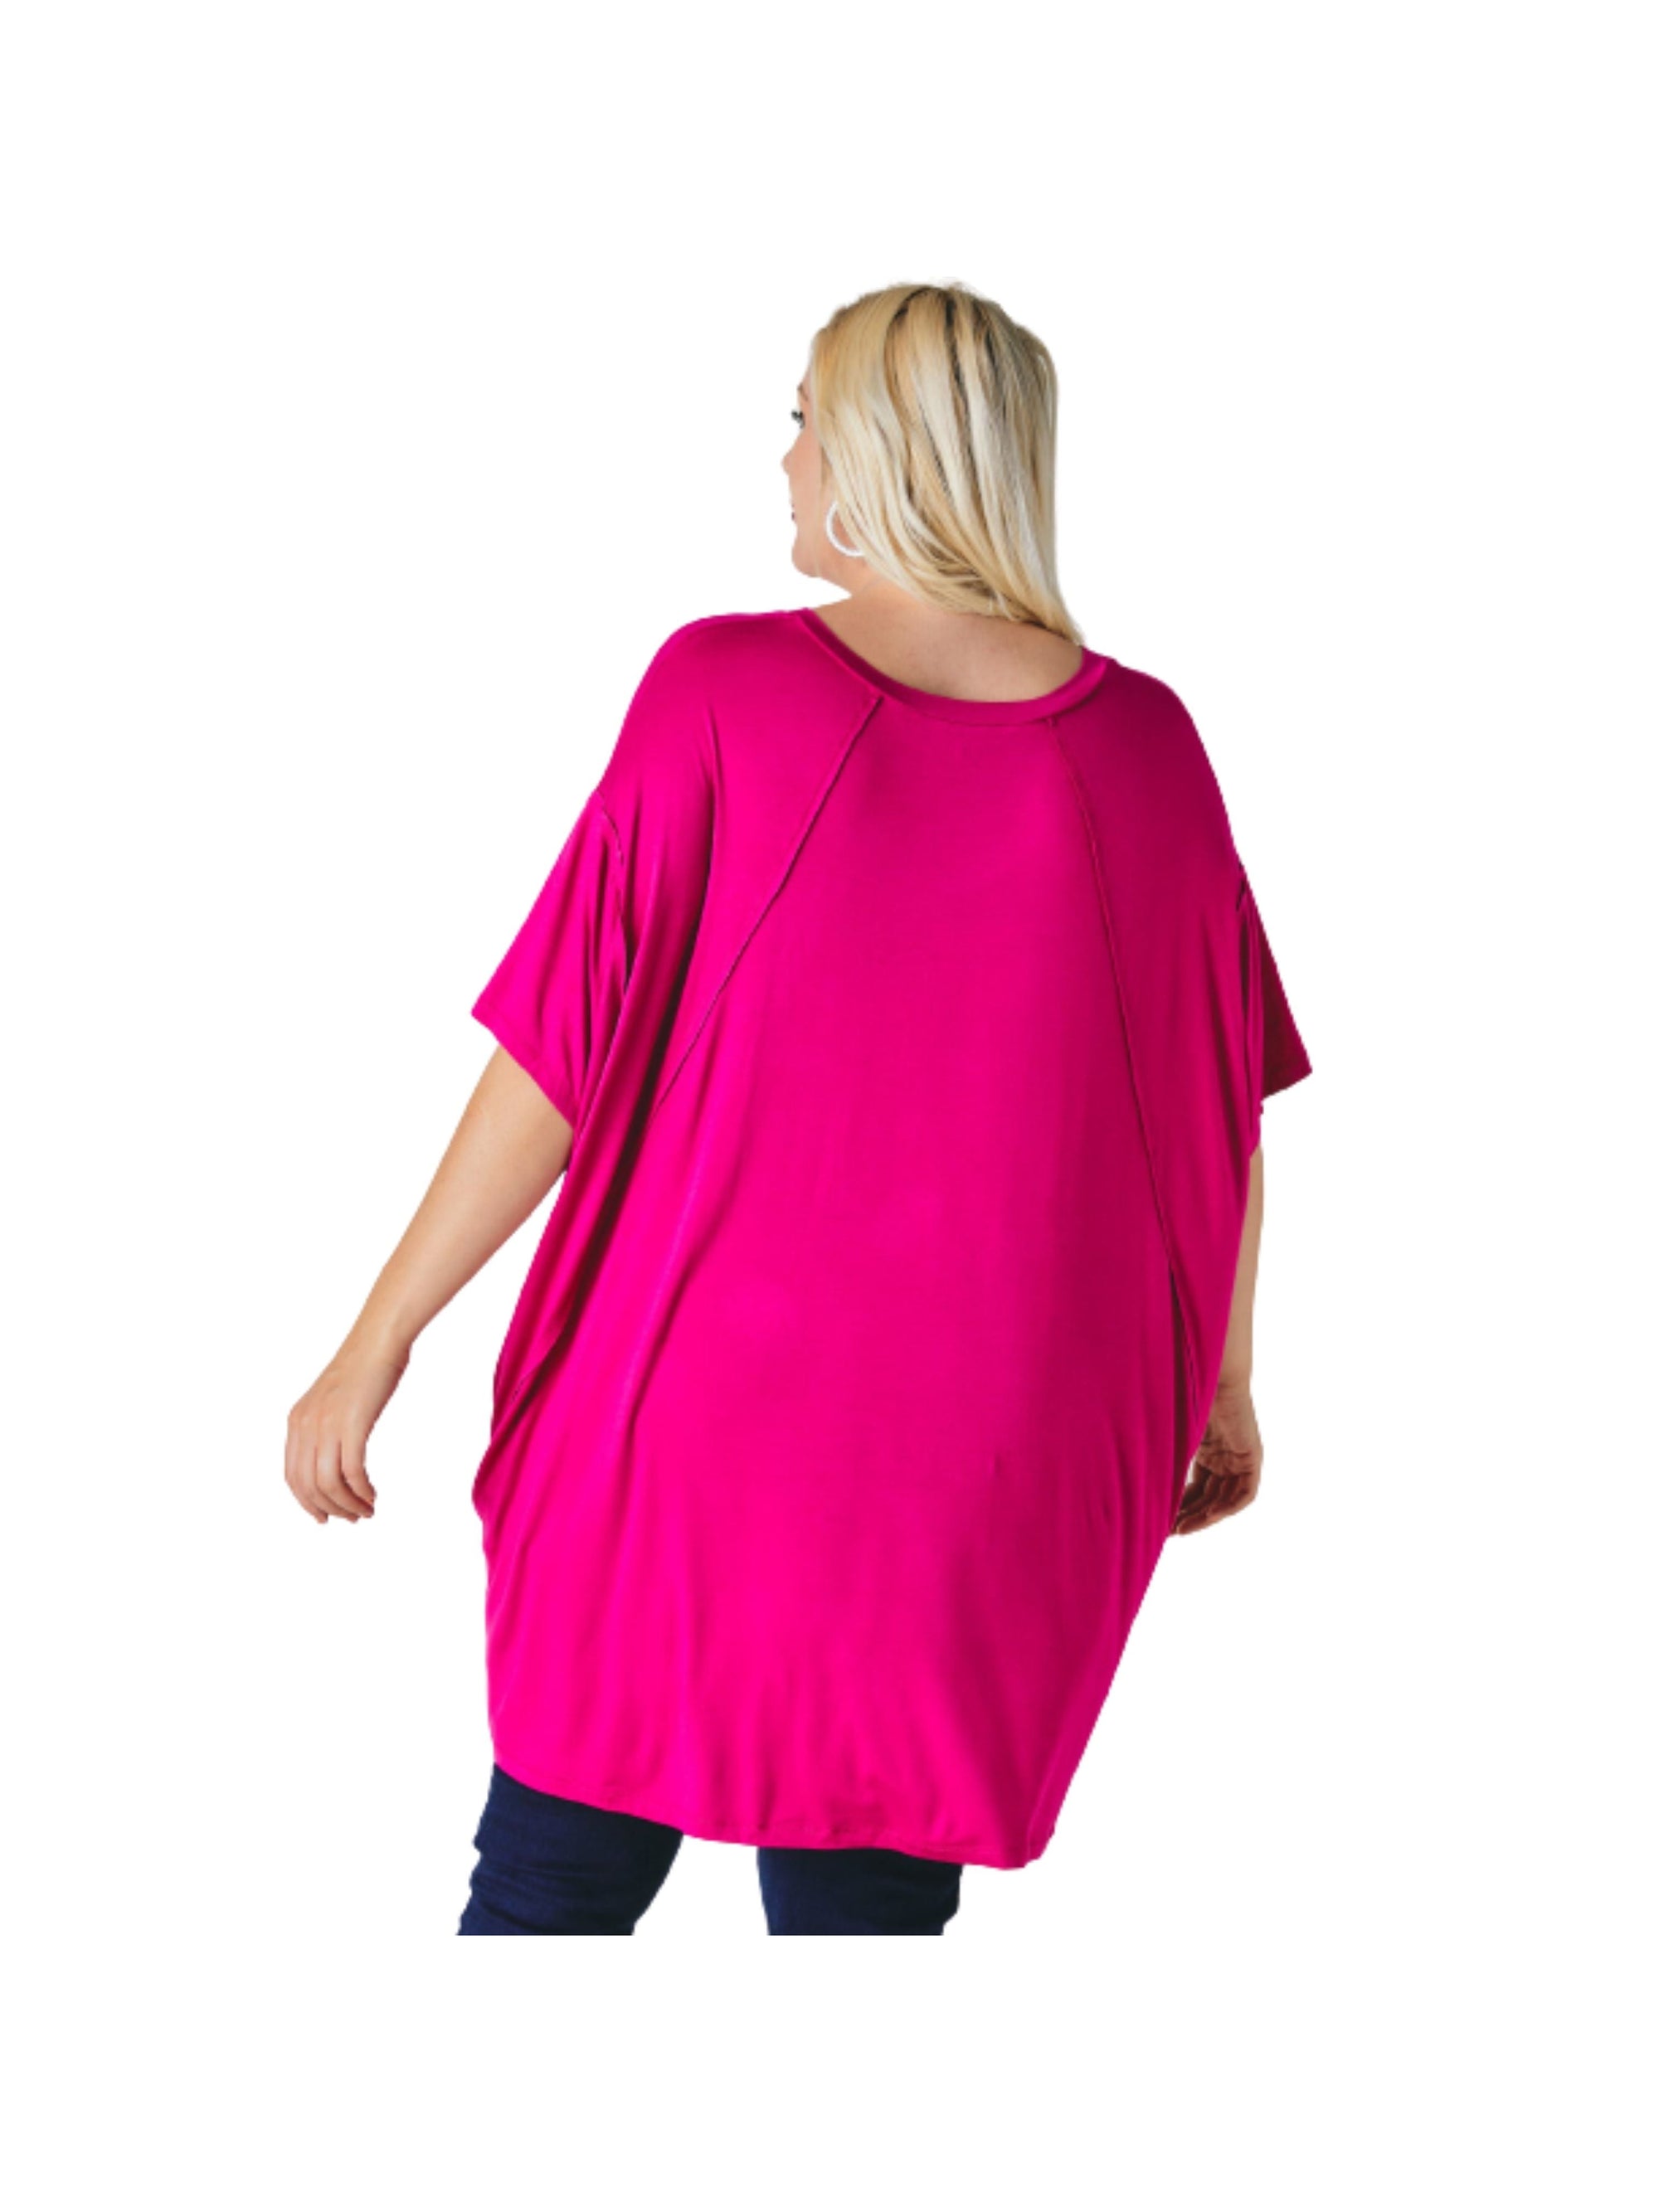 boutique pensacola curvy tops tops weekend tunic